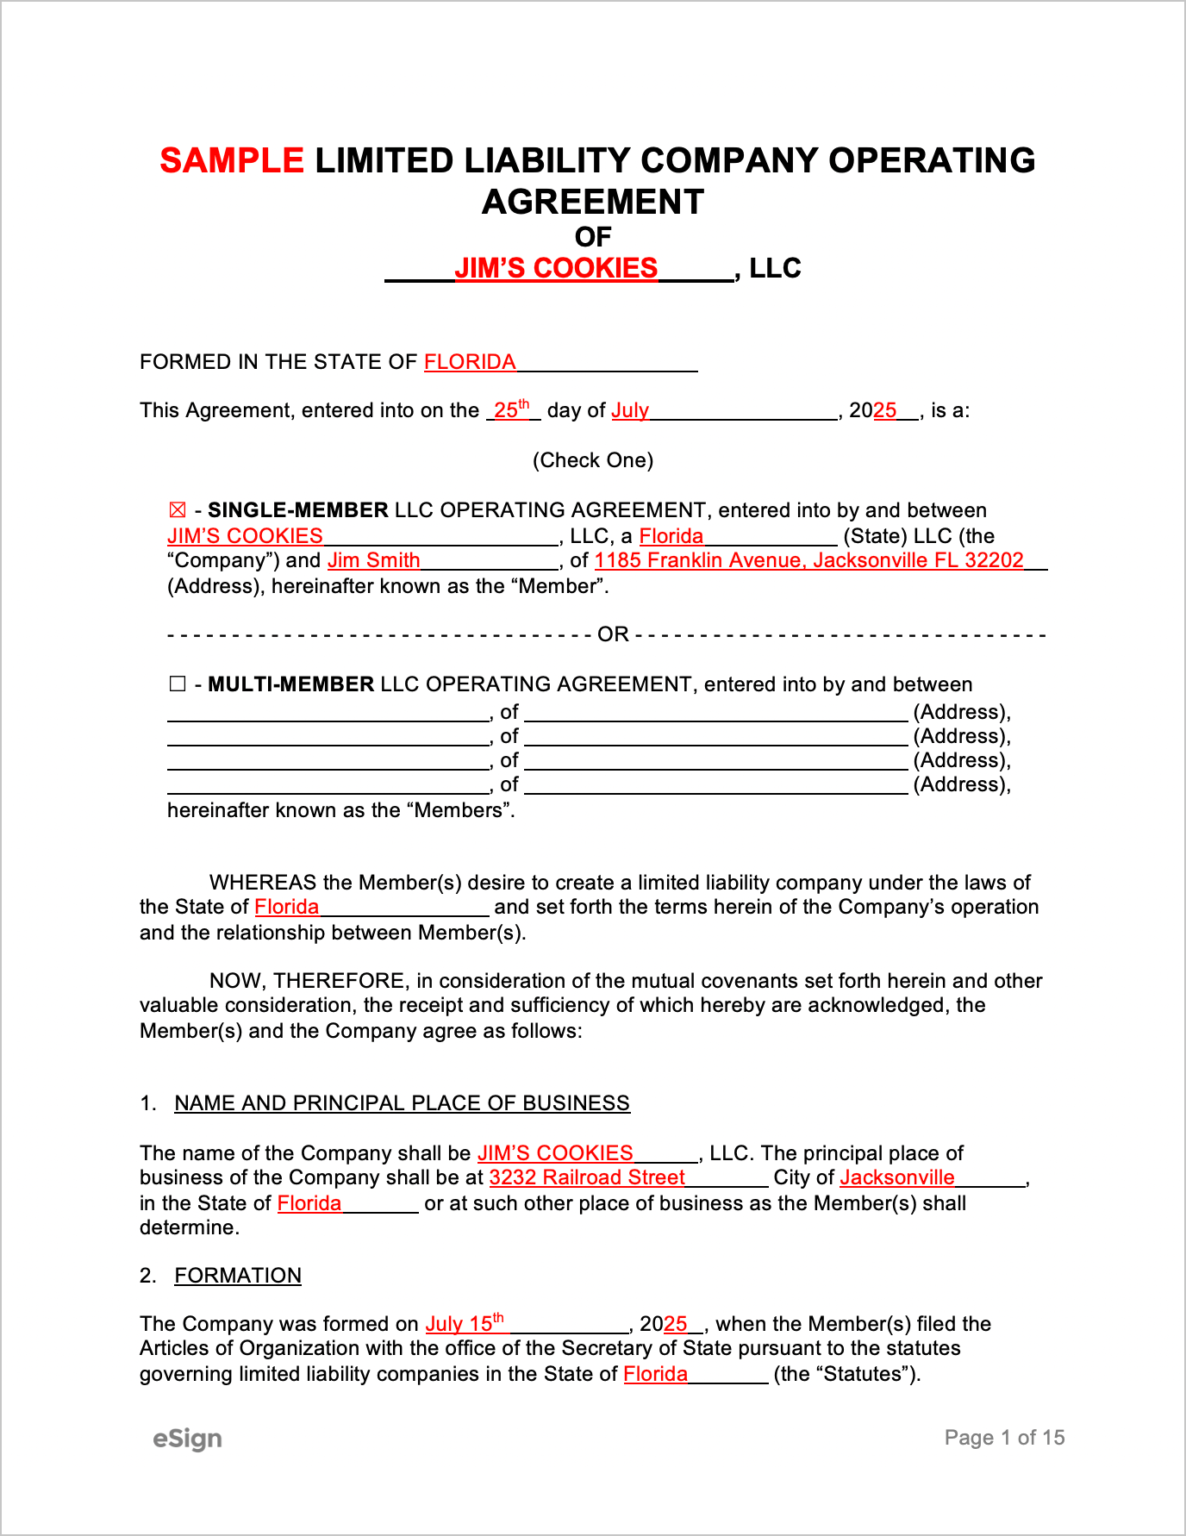 sample manager managed llc operating agreement in nevada